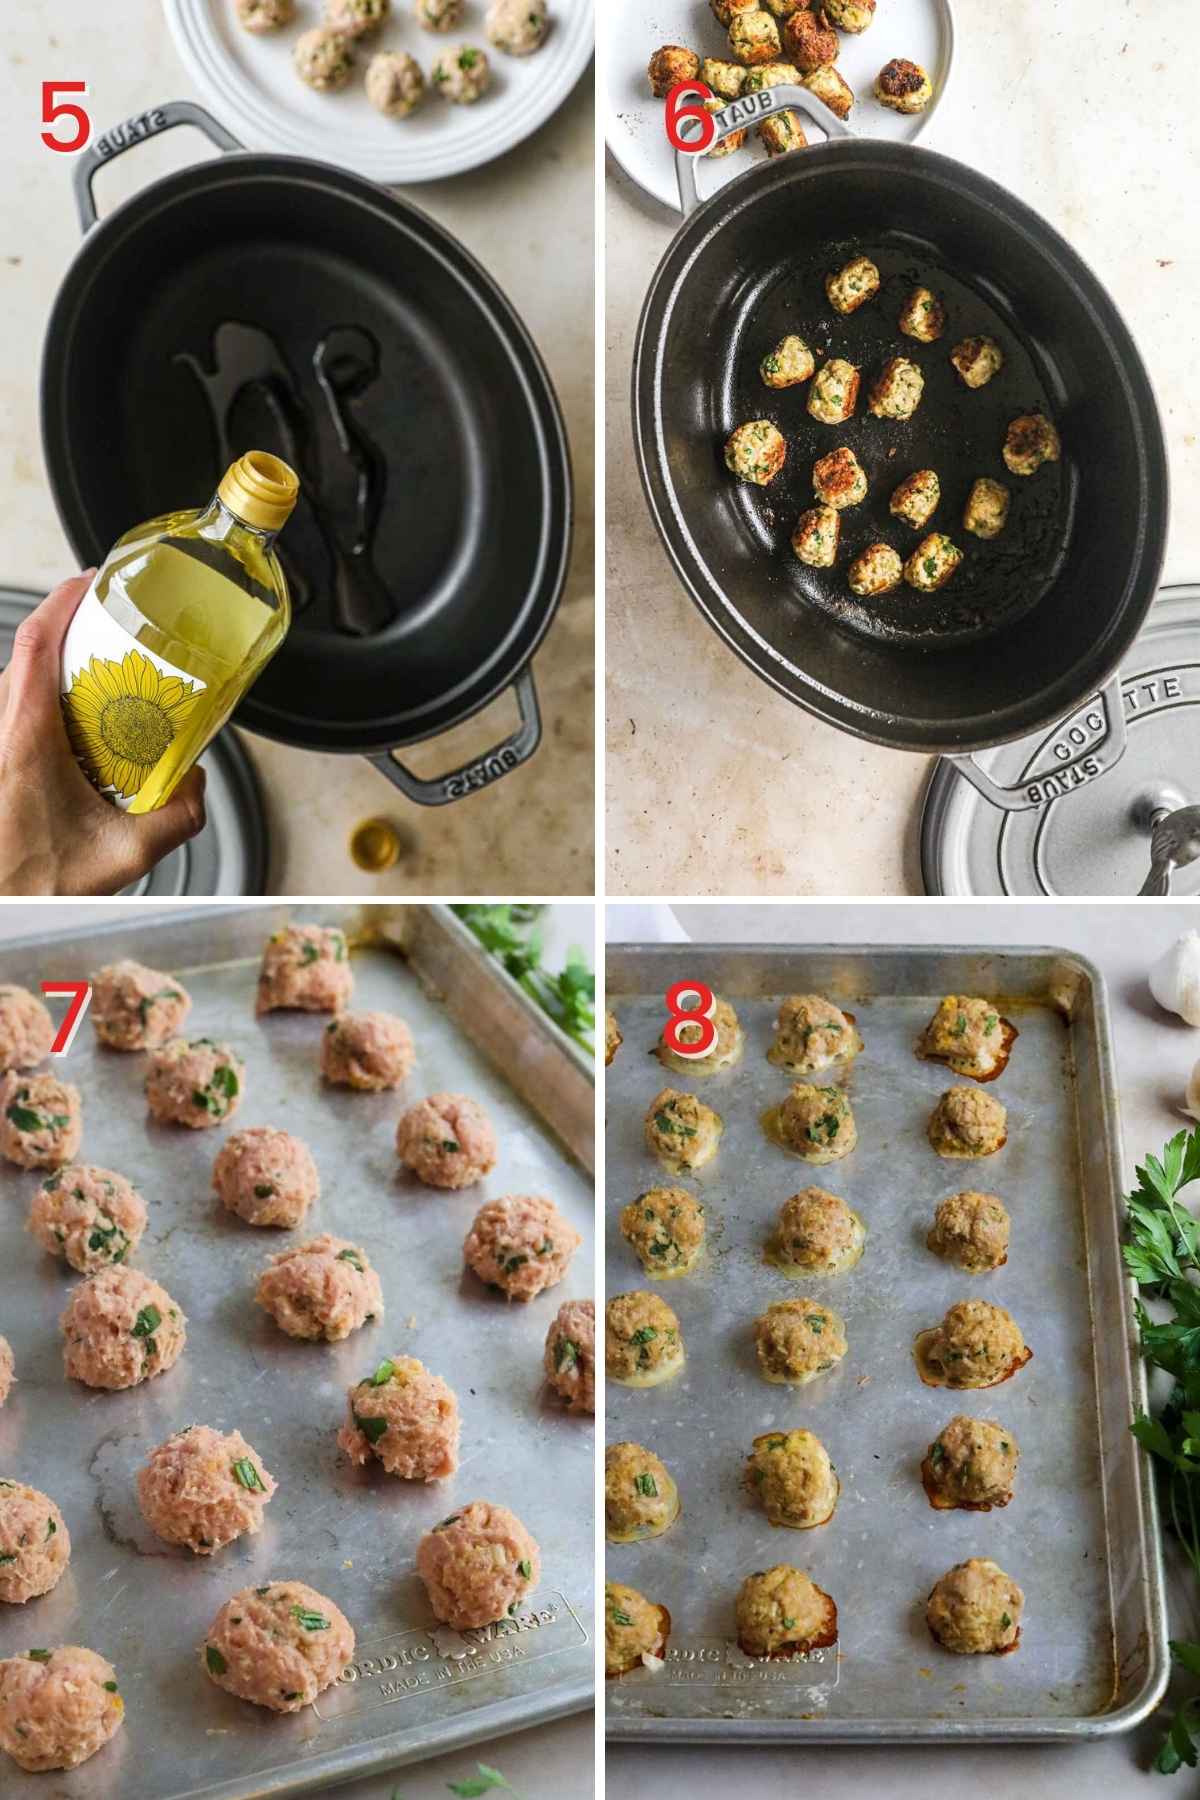 Steps to make healthy Italian chicken meatballs, including adding oil to the dutch oven or pan, adding the meatballs to brown, or baking the meatballs on a sheet pan.